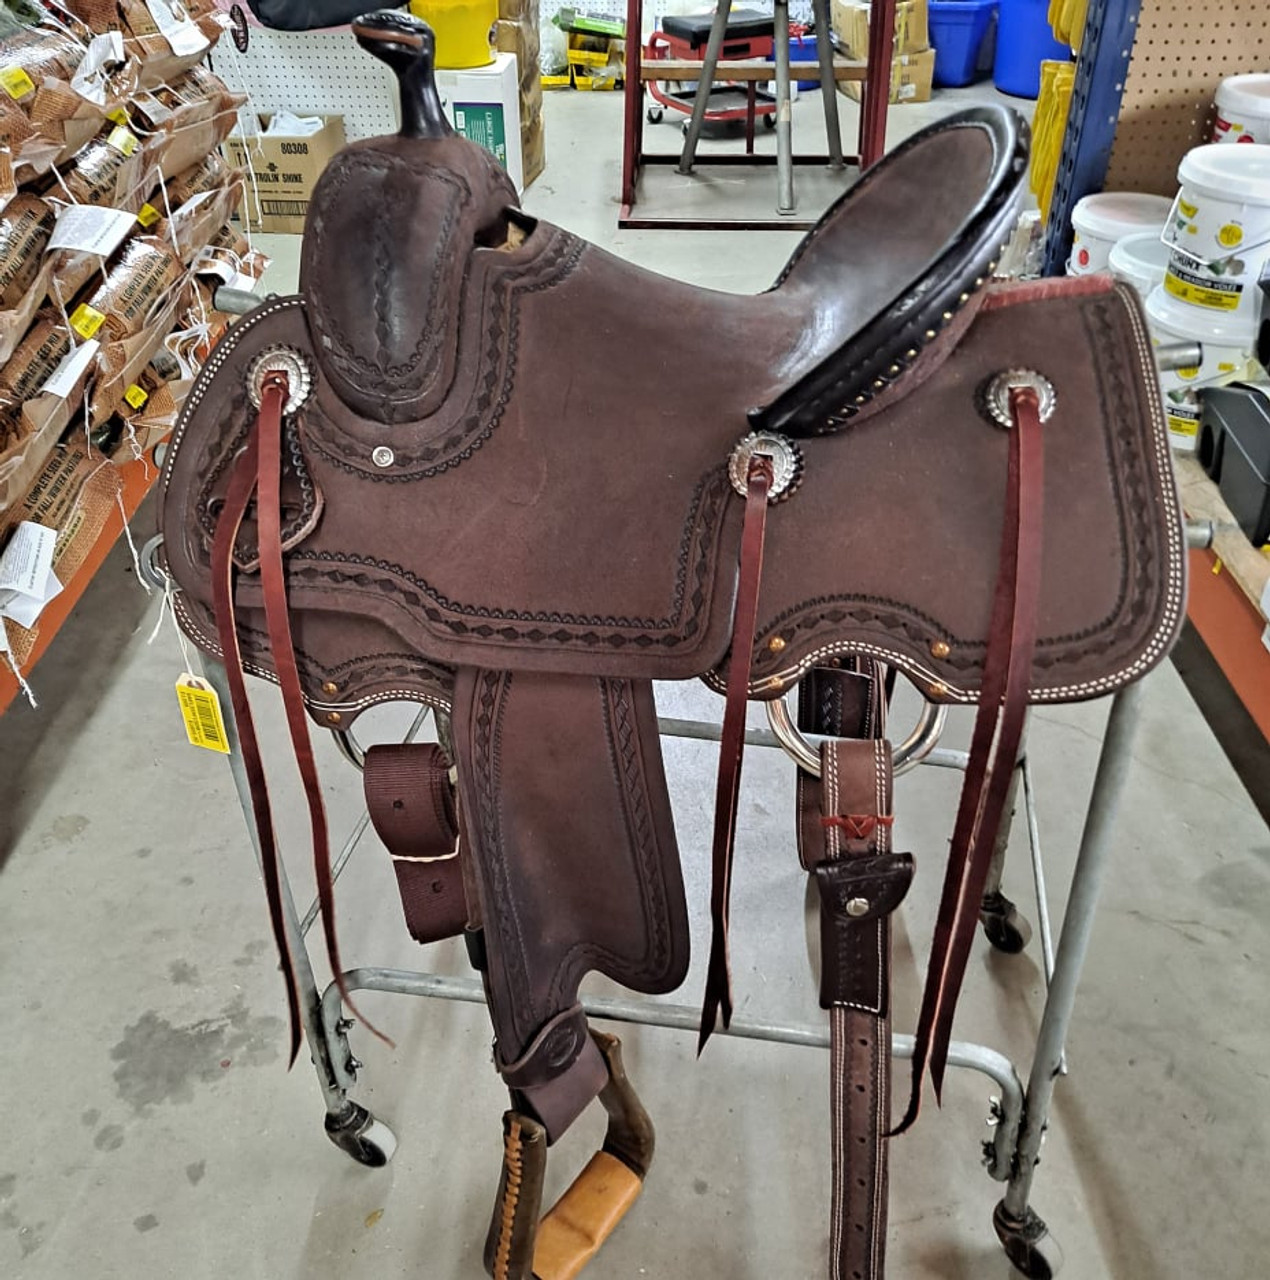 New All Around Saddle by Fort Worth Saddle Co with 13.5 inch seat. Built on our new proprietary Jplus "hog-bars" roping tree, our new all-around saddle is lightweight, but can be roped from. Limited lifetime warranty on tree. Constructed of Hermann Oak leather. Hand tooled. Secure pencil roll seat. Drop-rigged for added stability. Gullet size is 8.25 inch, weight is 35lbs, and skirt is 26 inch. Made in USA. Limited lifetime warranty.

S1399